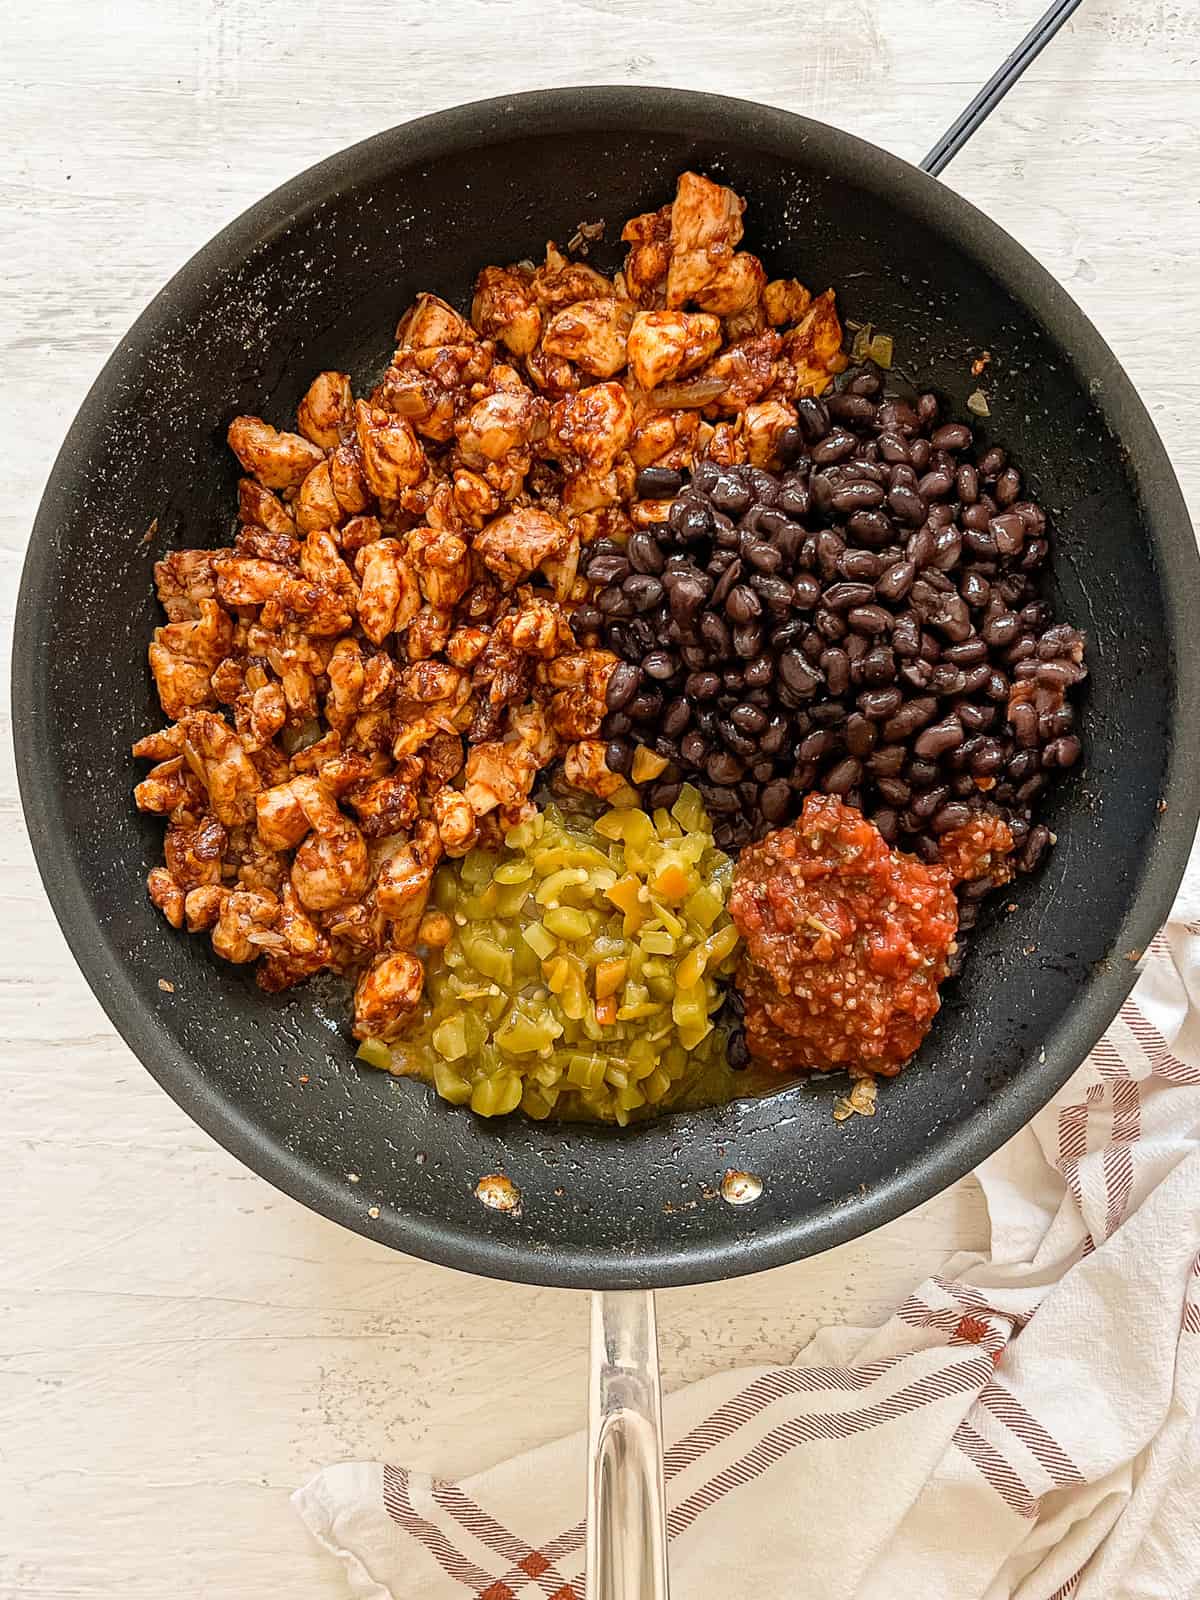 Cheesy Chicken Enchilada filling ingredients in piles in a skillet: cooked taco-seasoned chicken, green chiles, black beans, and salsa.